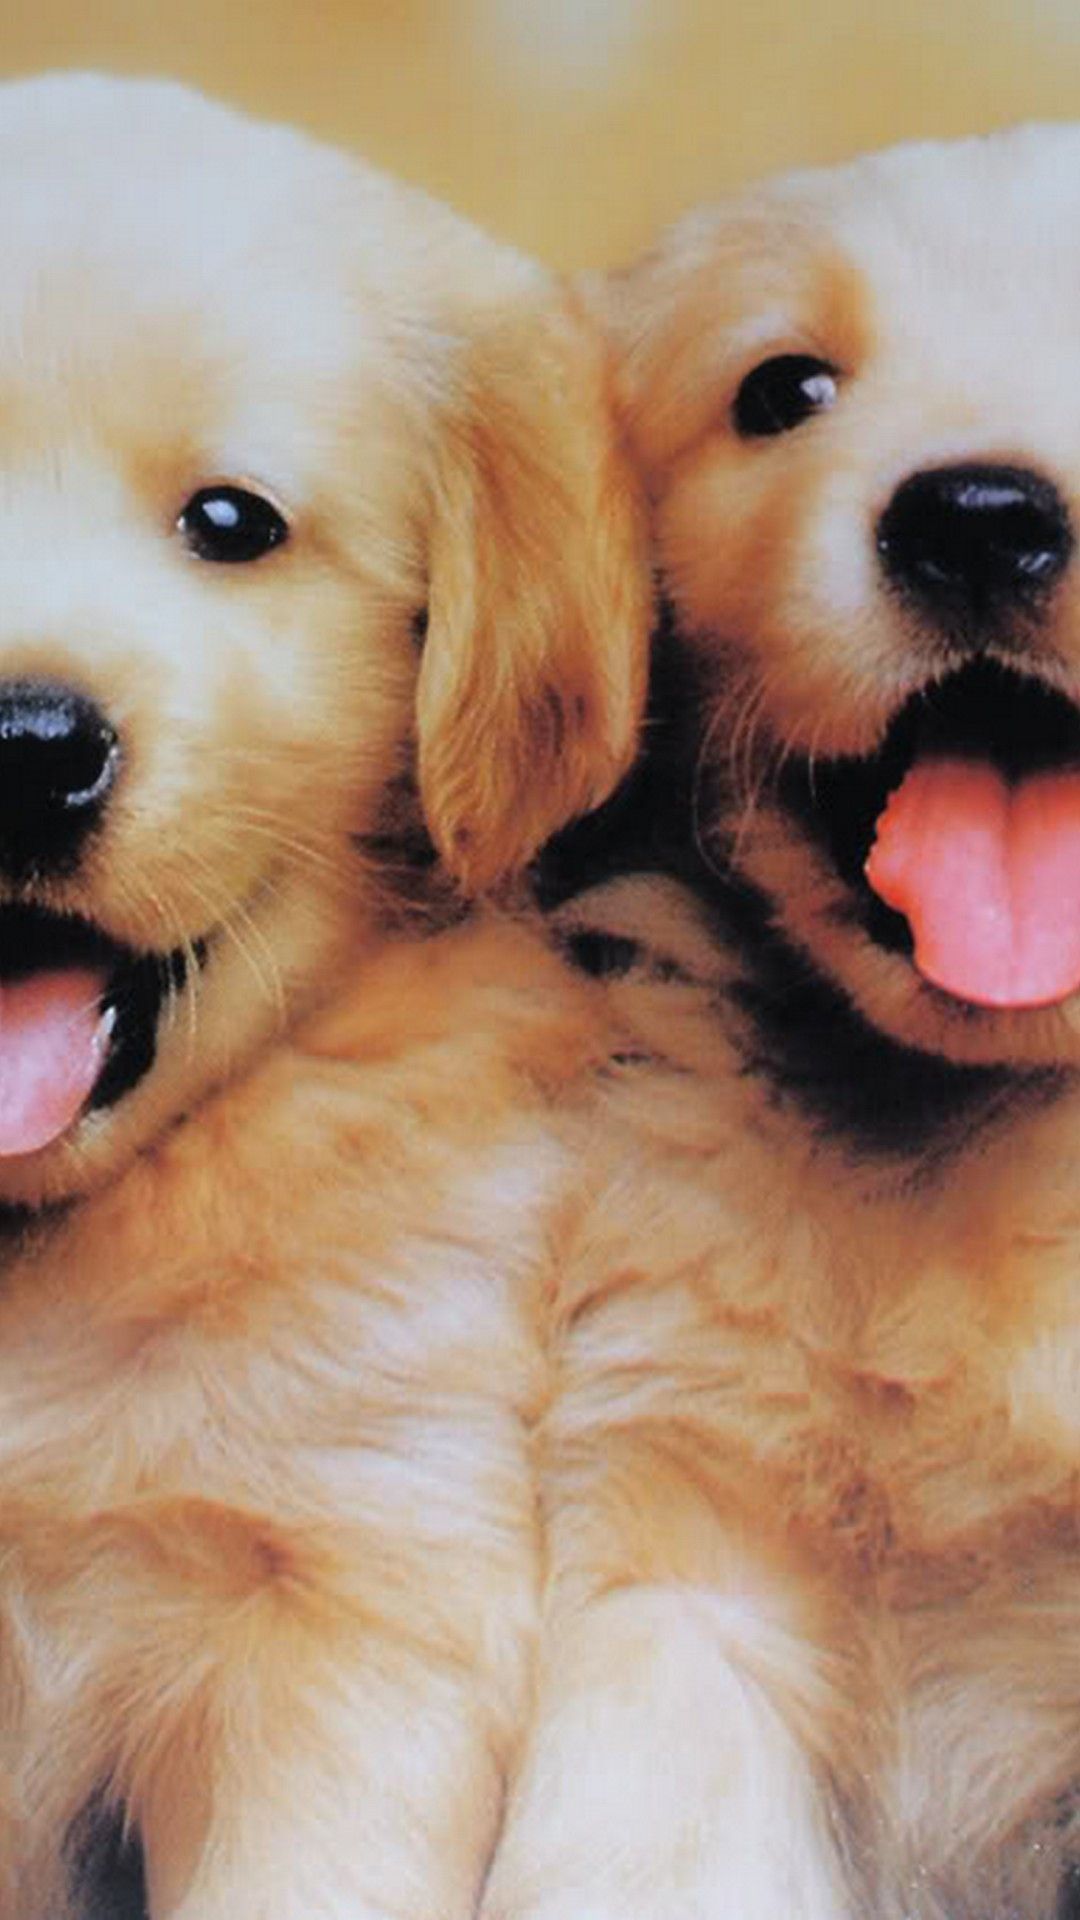 Puppy iPhone Wallpapers - Wallpaper Cave